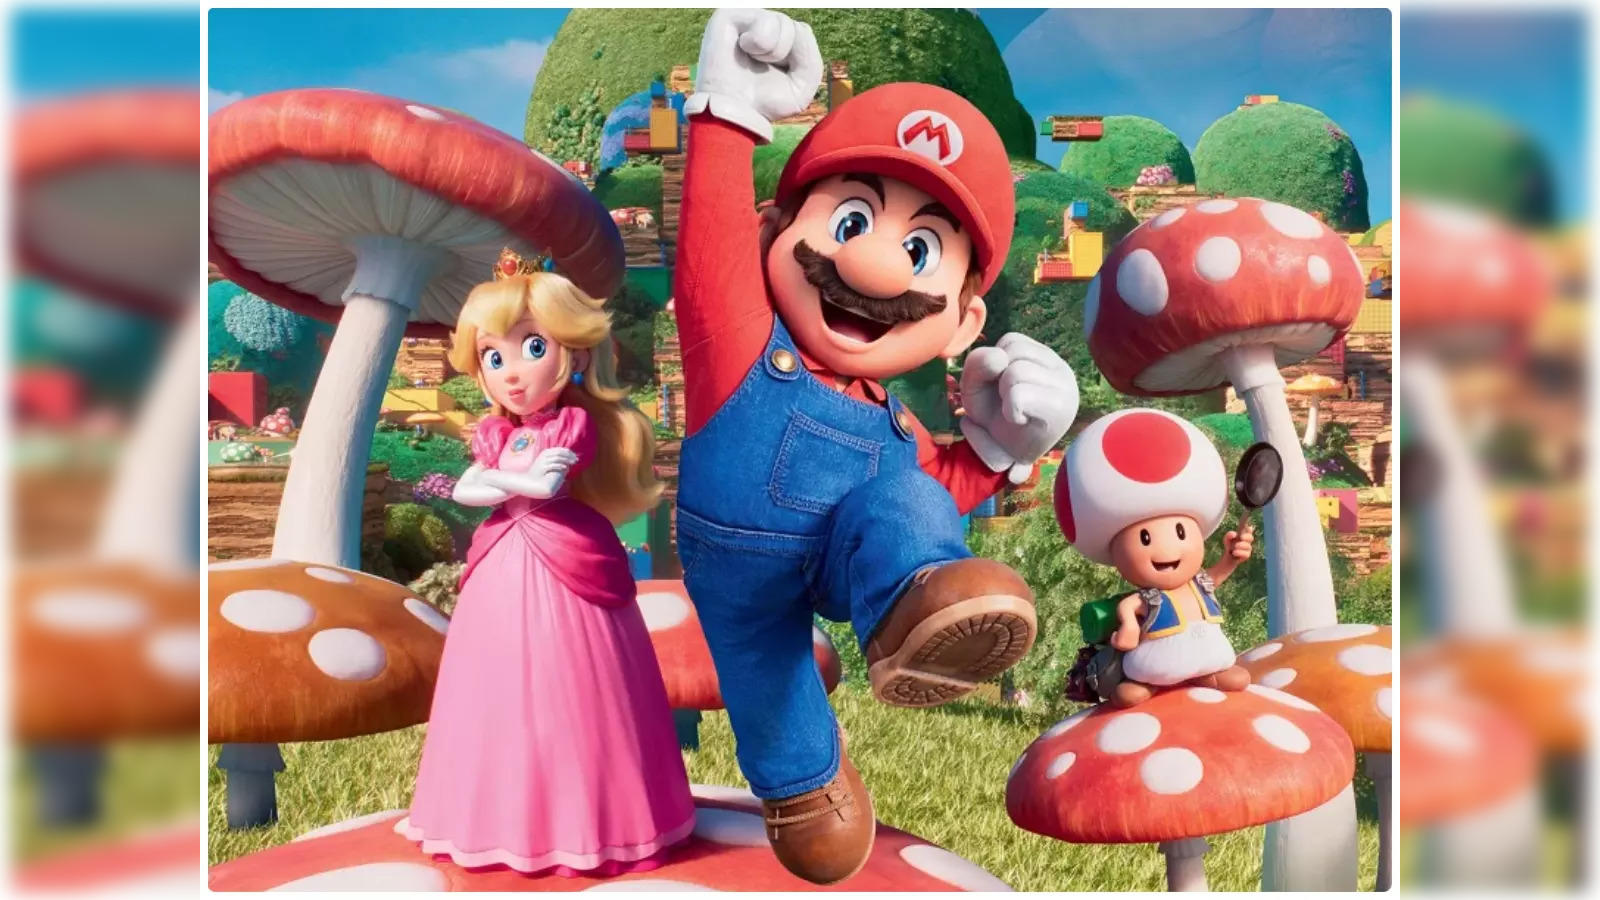 How to Watch Super Mario Bros Movie: Where to watch 'Super Mario Bros.  Movie' online for free? Is 2023 Super Mario Bros. film available on Netflix  or HBO Max? - The Economic Times